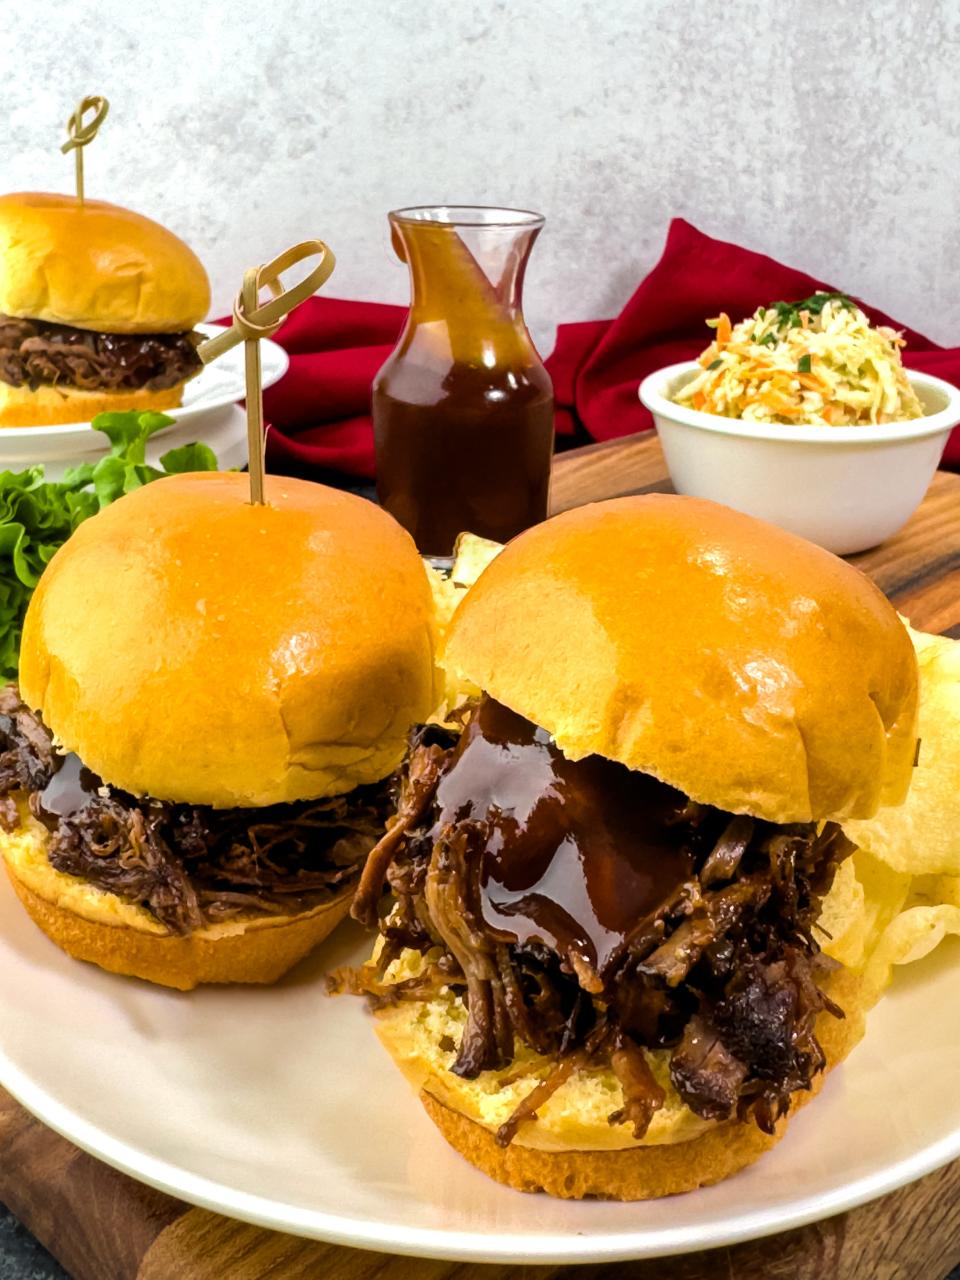 Easy Slow Cooker Barbecue Beef Sliders deliver all the deliciousness of traditional barbecue without the fuss of the grill.